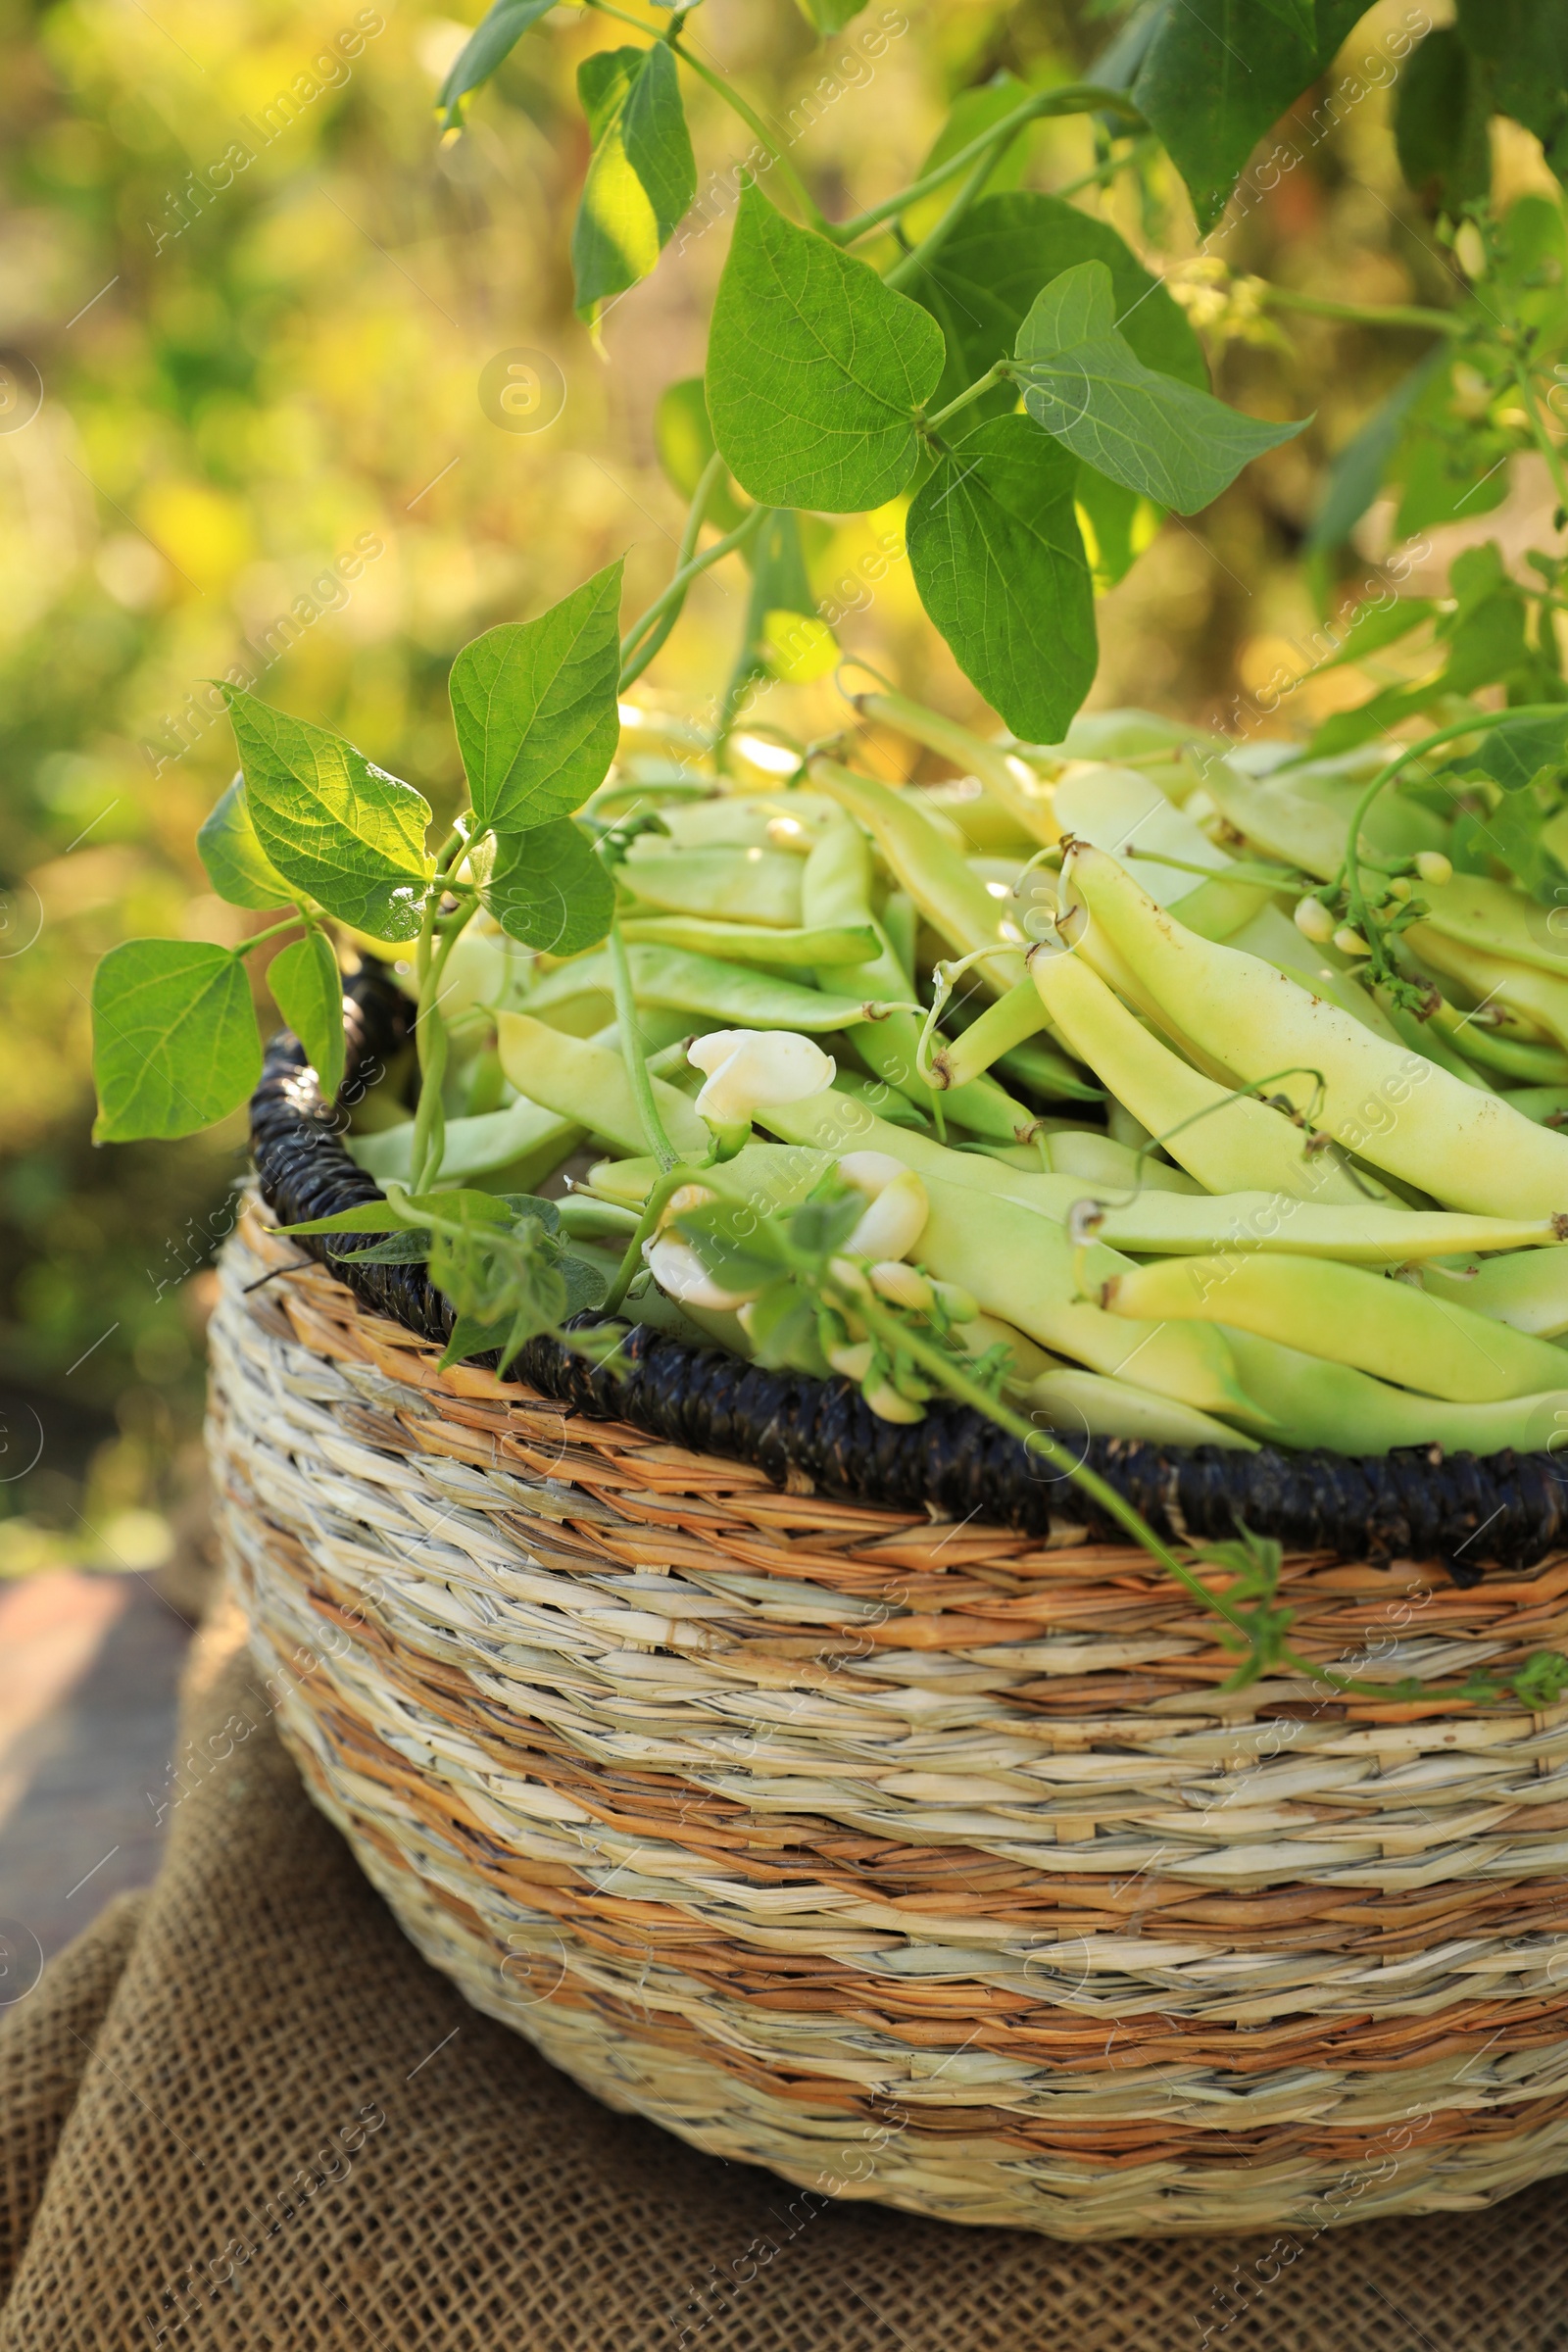 Photo of Wicker basket with fresh green beans on stool in garden